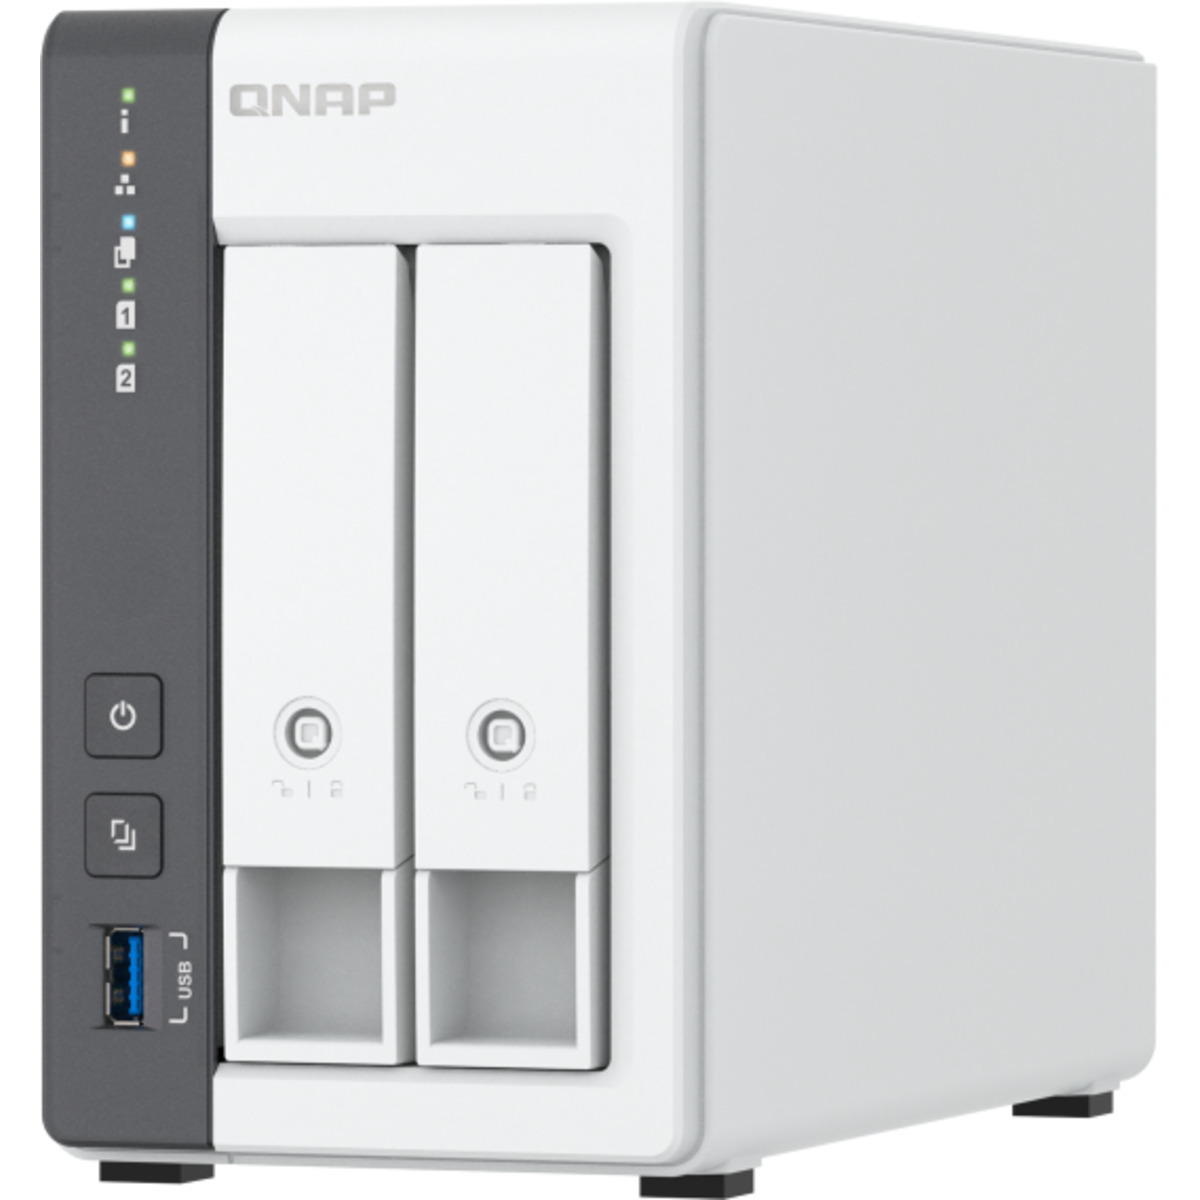 QNAP TS-216G 32tb 2-Bay Desktop Personal / Basic Home / Small Office NAS - Network Attached Storage Device 2x16tb Seagate EXOS X18 ST16000NM000J 3.5 7200rpm SATA 6Gb/s HDD ENTERPRISE Class Drives Installed - Burn-In Tested TS-216G